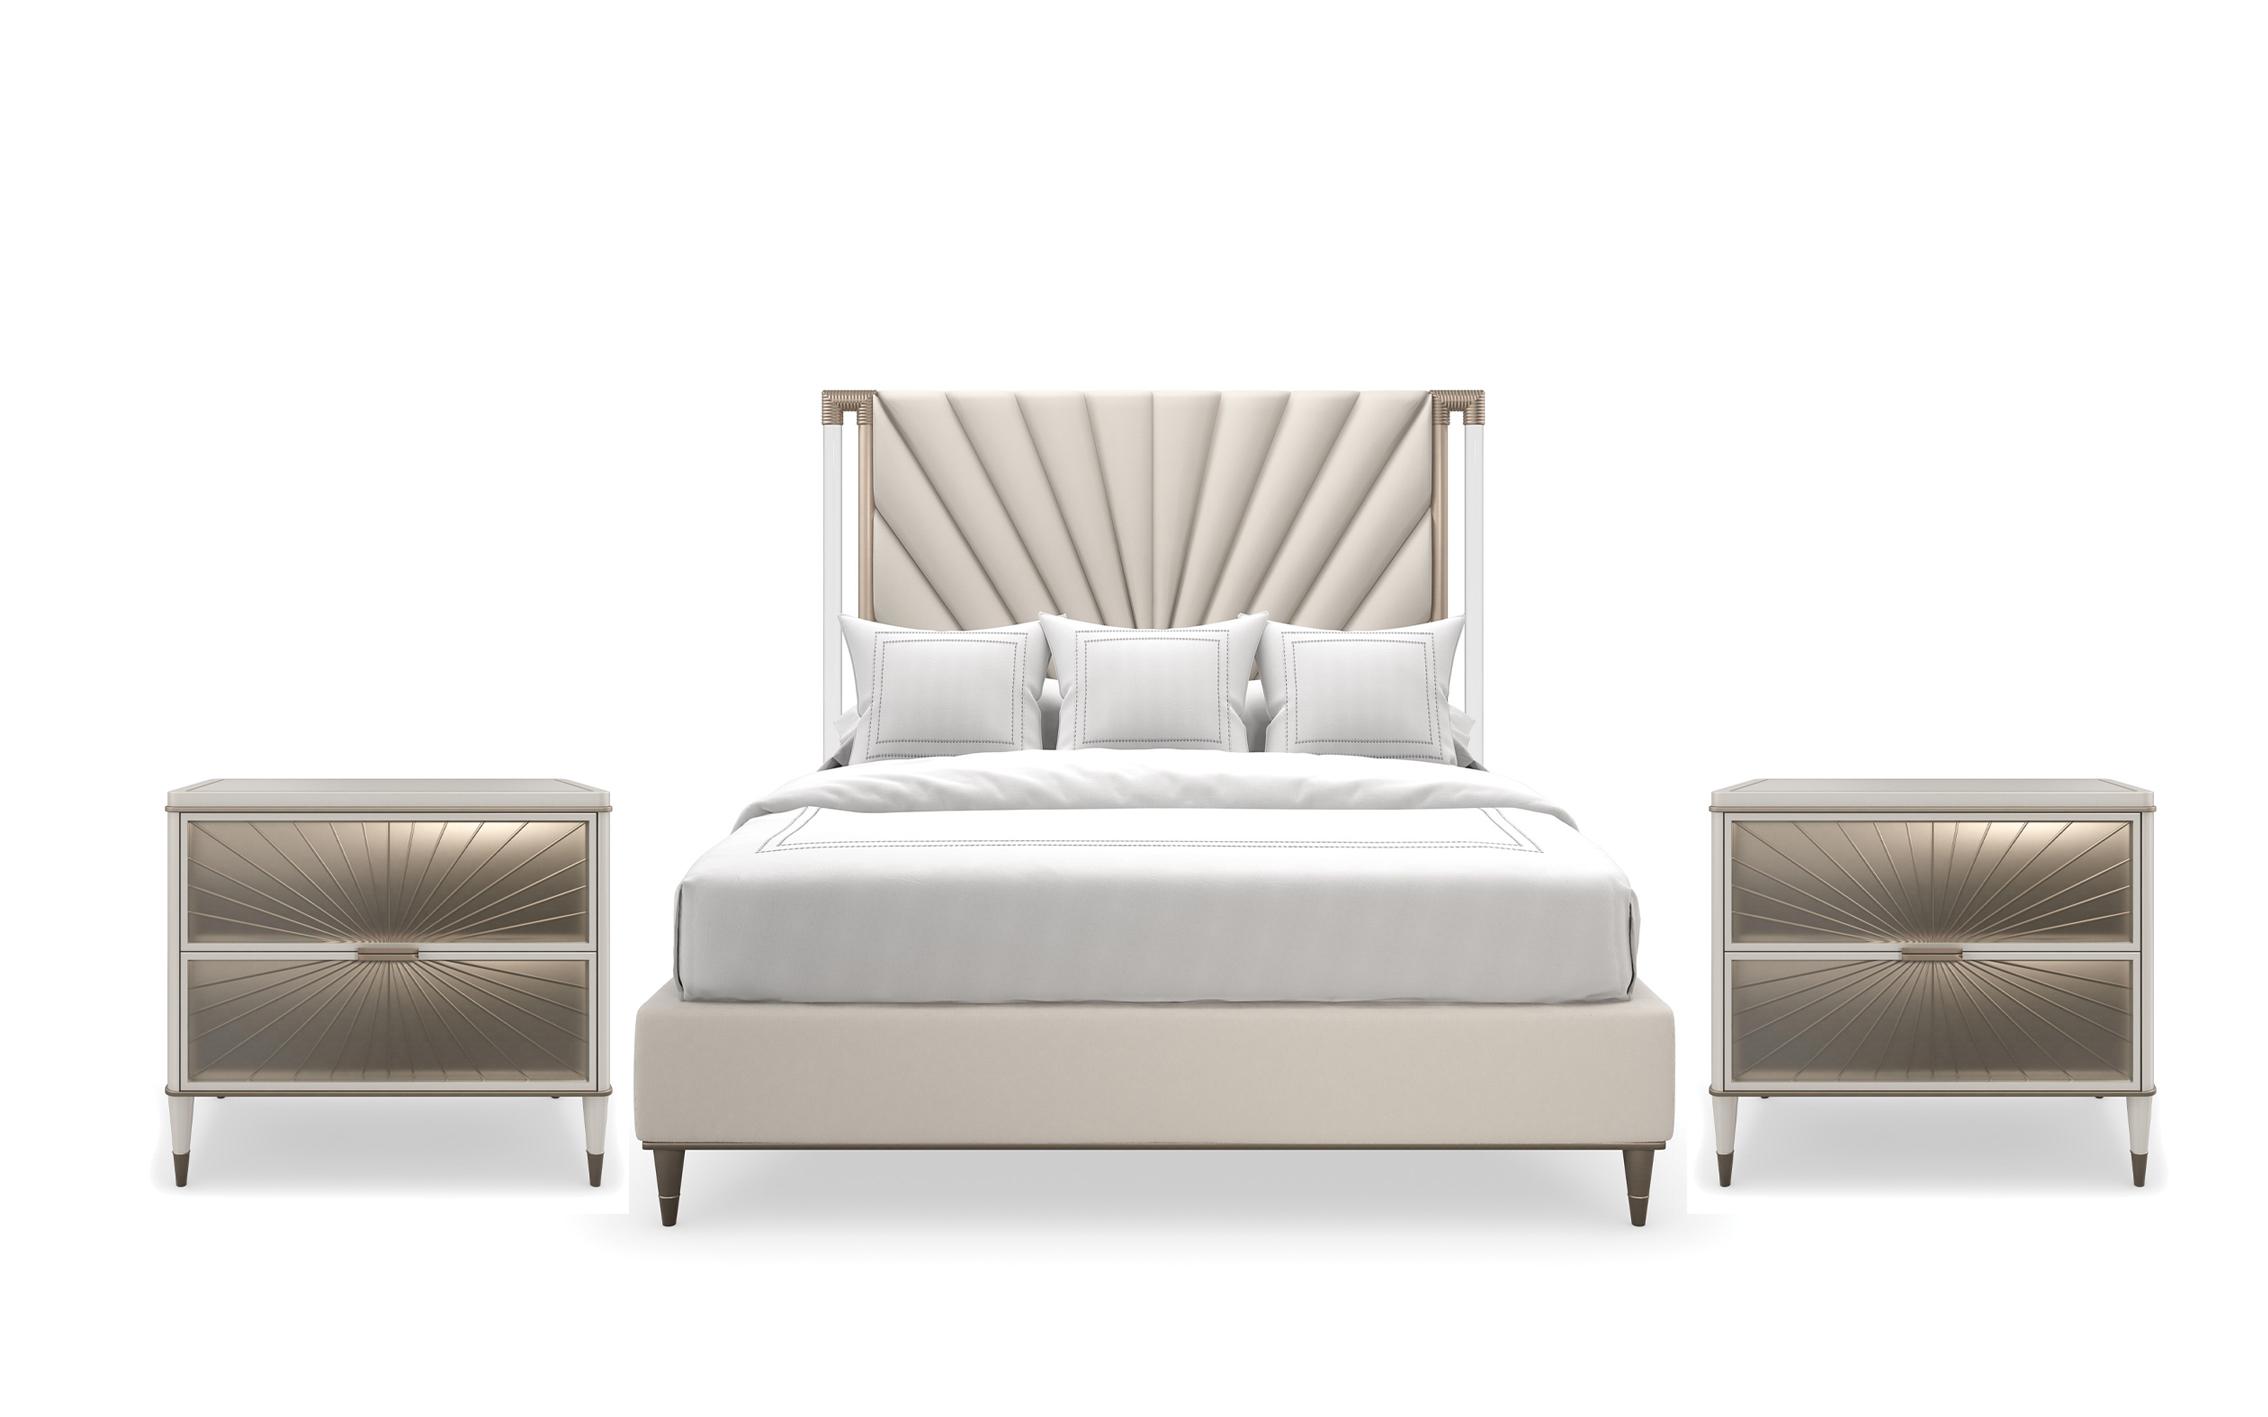 Contemporary Platform Bedroom Set VALENTINA UPH KING BED / VALENTINA SMALL NIGHTSTAND C113-422-121-Set-3 in Pearl, Gold Fabric